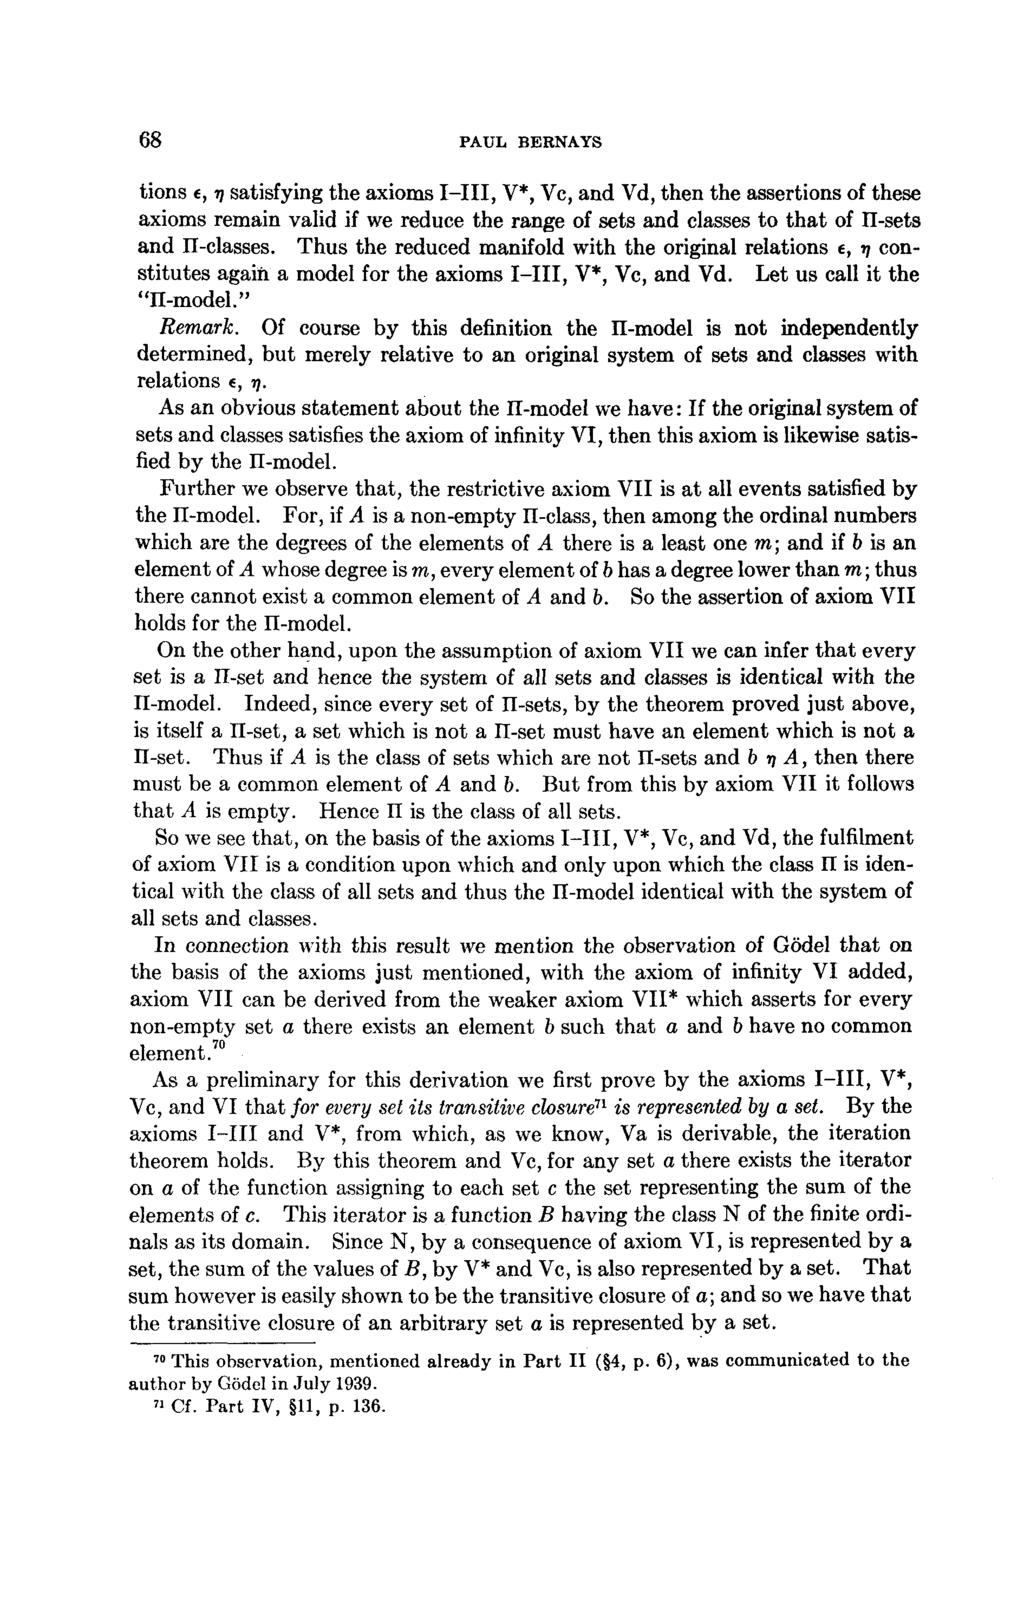 68 PAUL BEKNAYS tions t, r) satisfying the axioms I III, V*, Vc, and Vd, then the assertions of these axioms remain valid if we reduce the range of sets and classes to that of II-sets and II-classes.